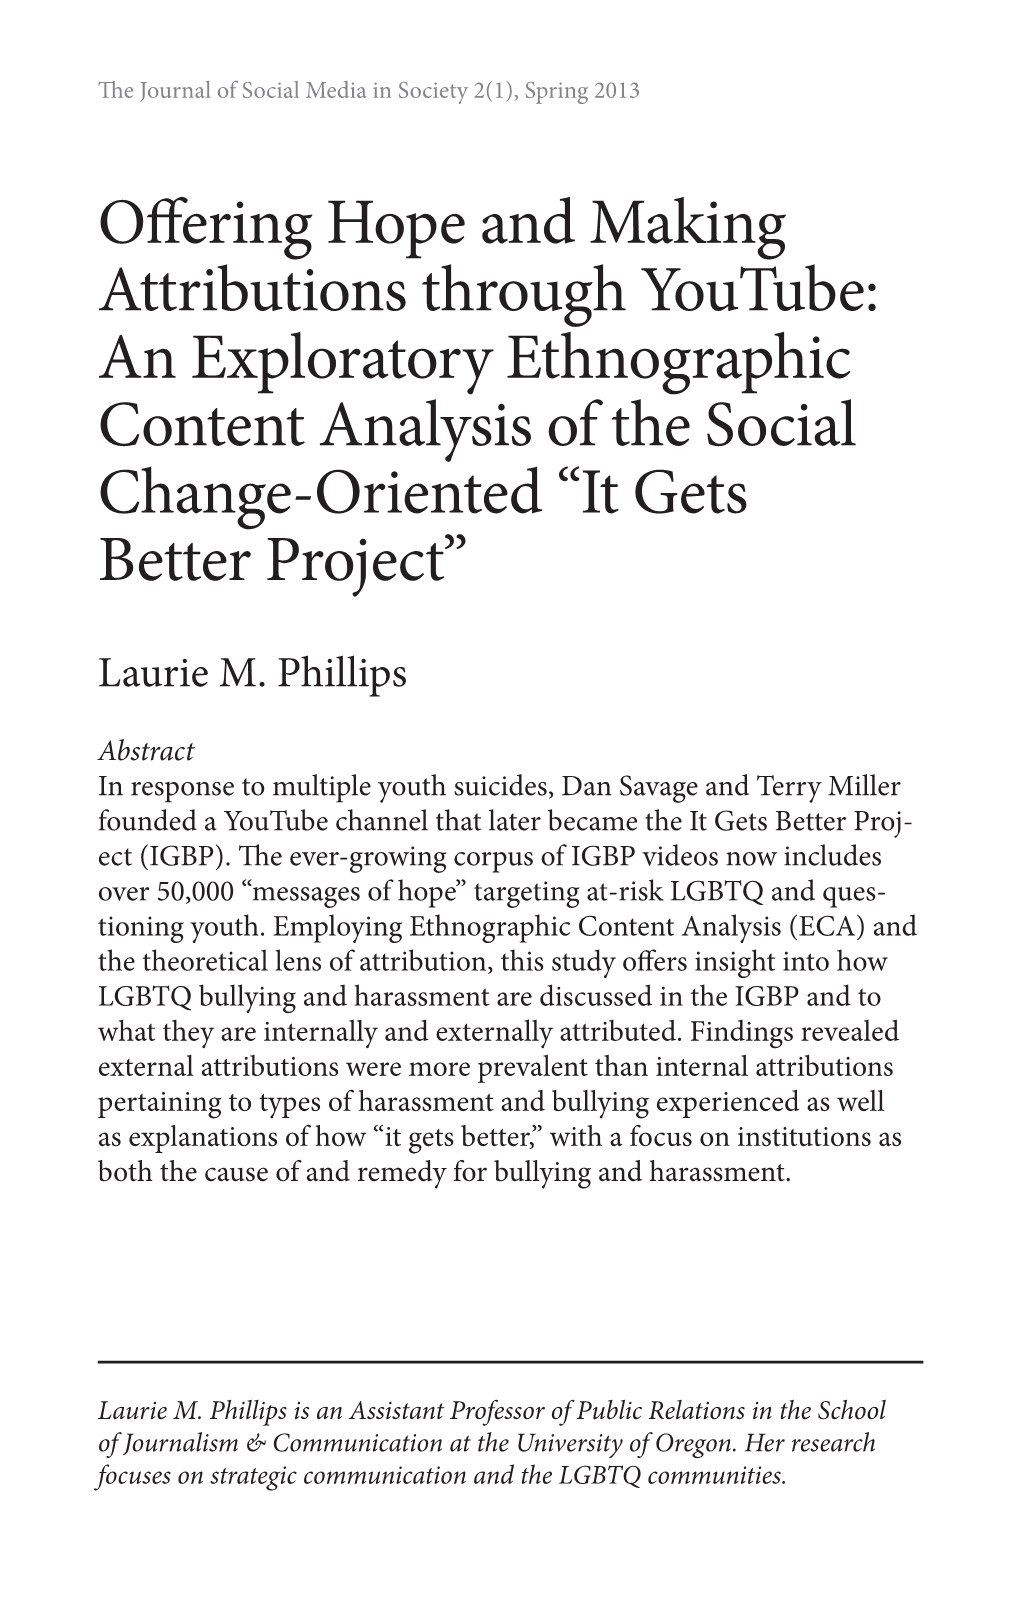 Offering Hope and Making Attributions Through Youtube: an Exploratory Ethnographic Content Analysis of the Social Change-Oriented “It Gets Better Project”